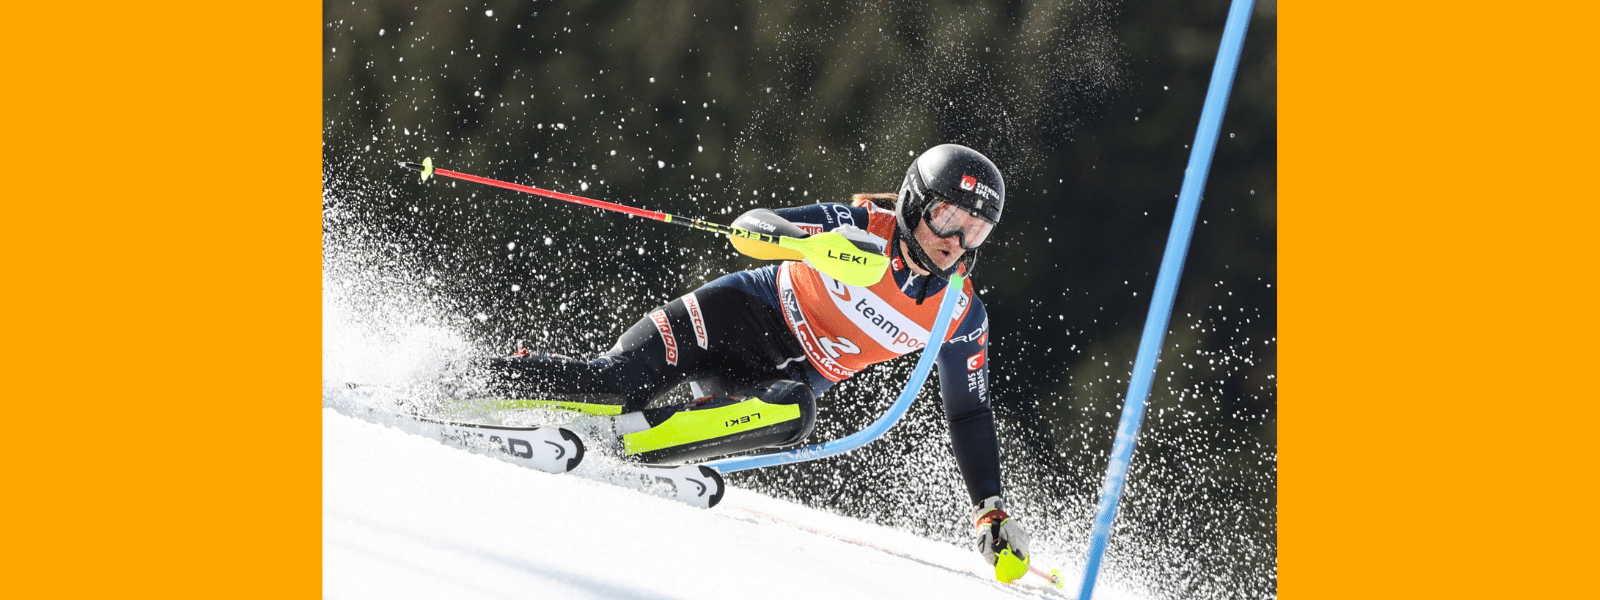 Larsson in the Lead, Shiffrin in Pursuit for Final Run